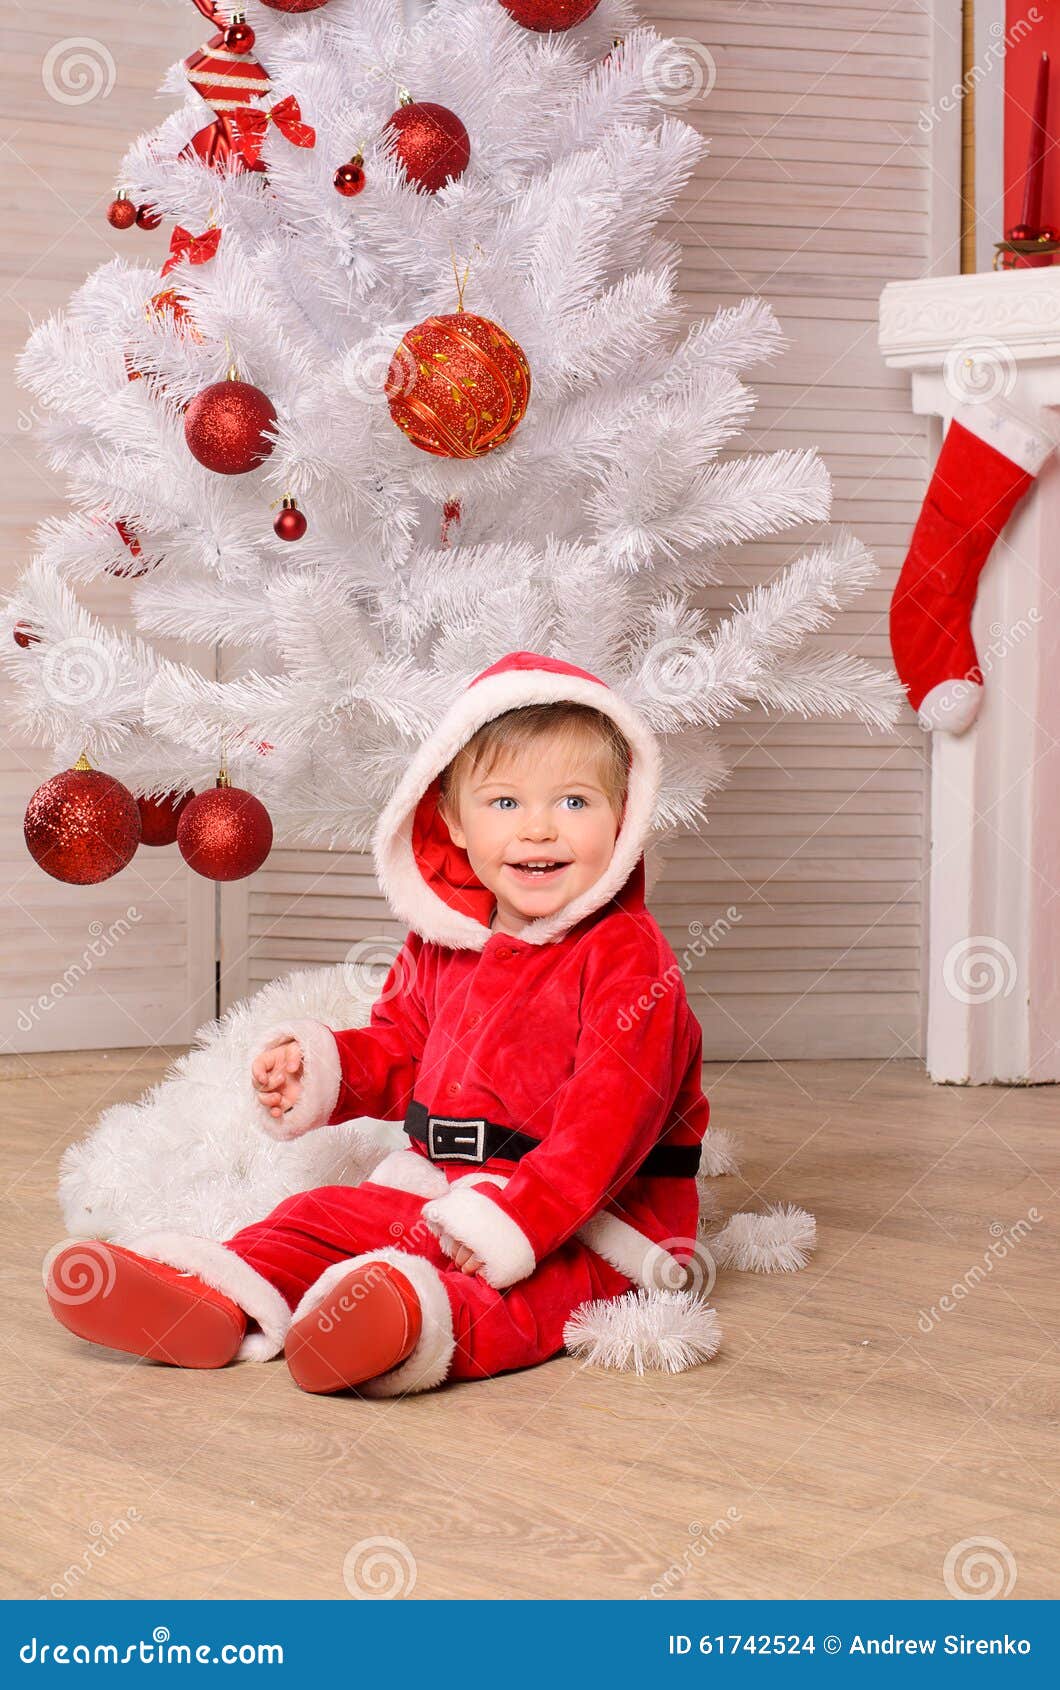 Little Boy in Festive Attire at Christmas Tree Stock Photo - Image of ...